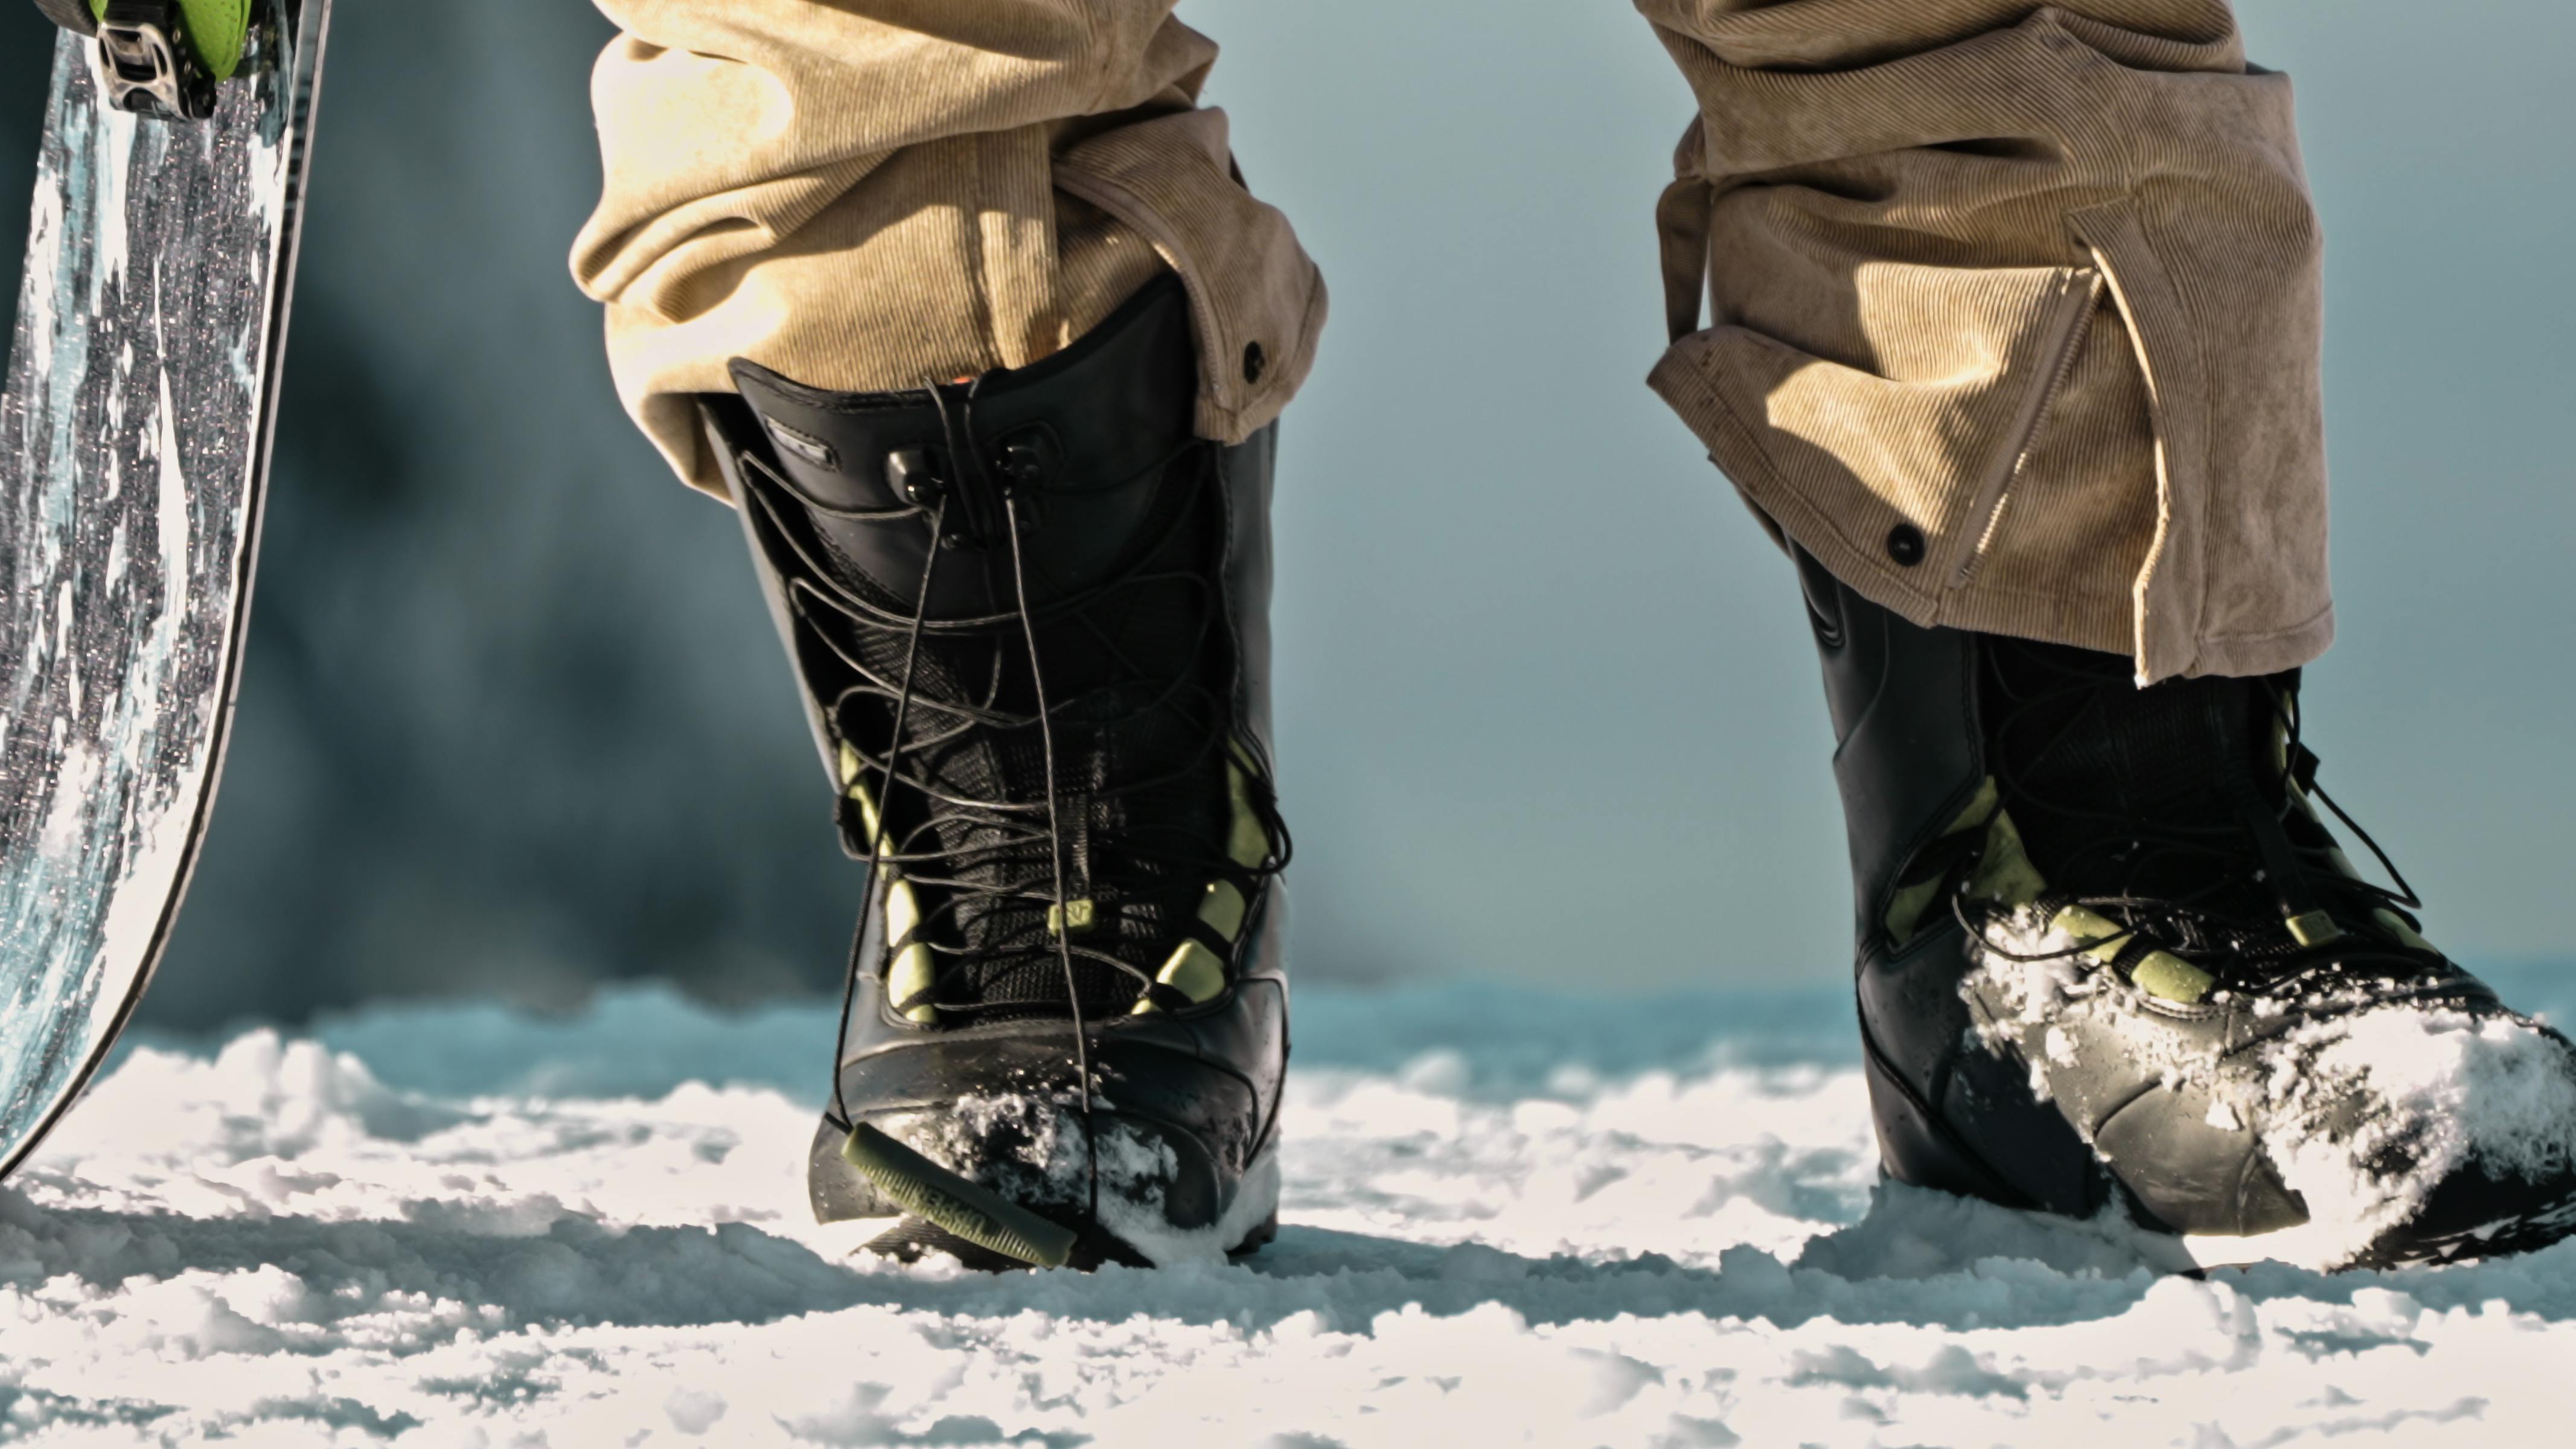 Close up of snowboard boots as a snowboarder is wearing them while holding his snowboard.